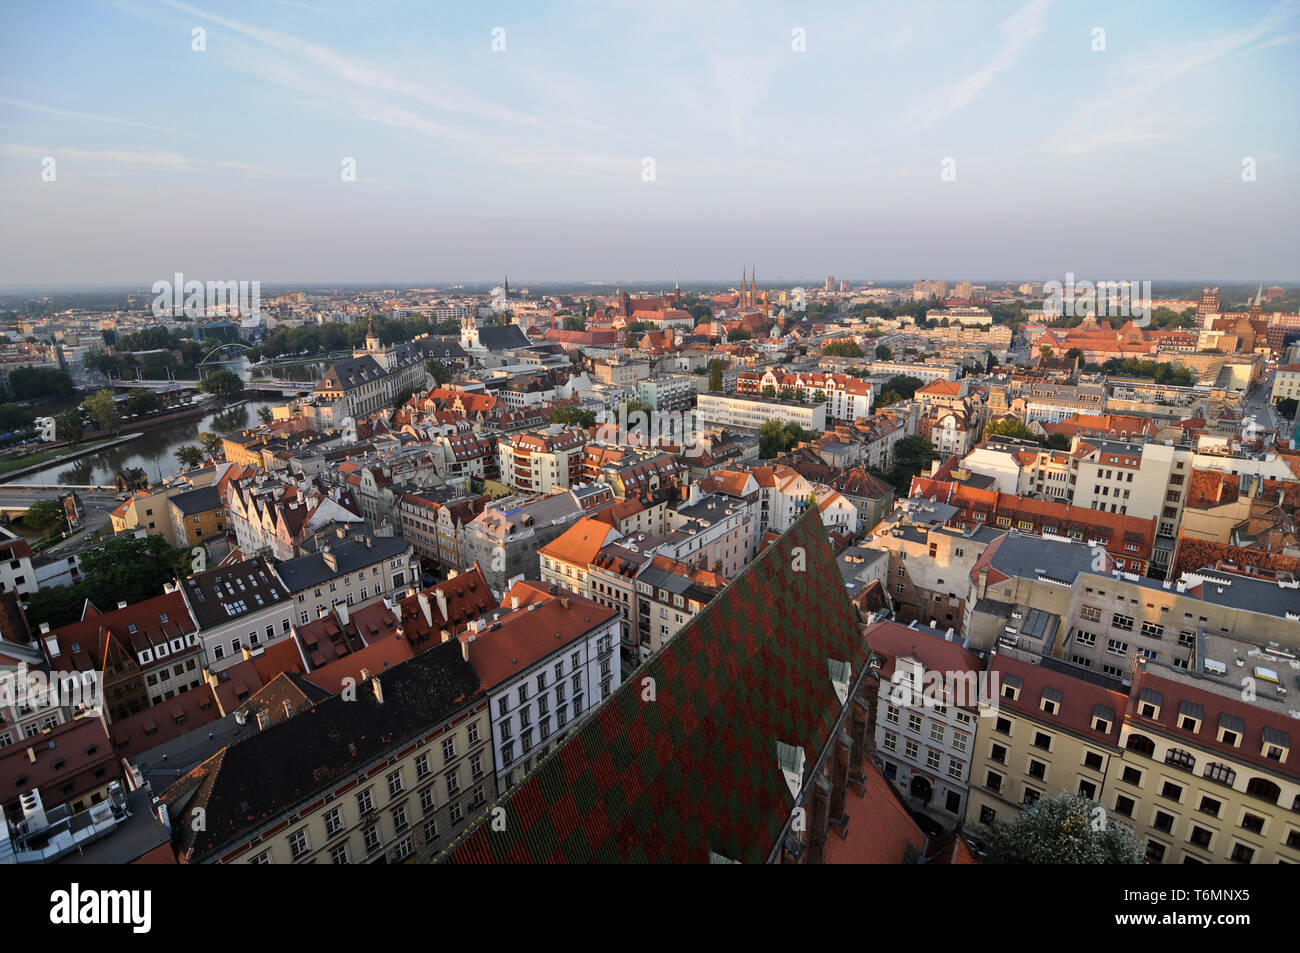 Wroclaw, panoramic view, Poland Stock Photo